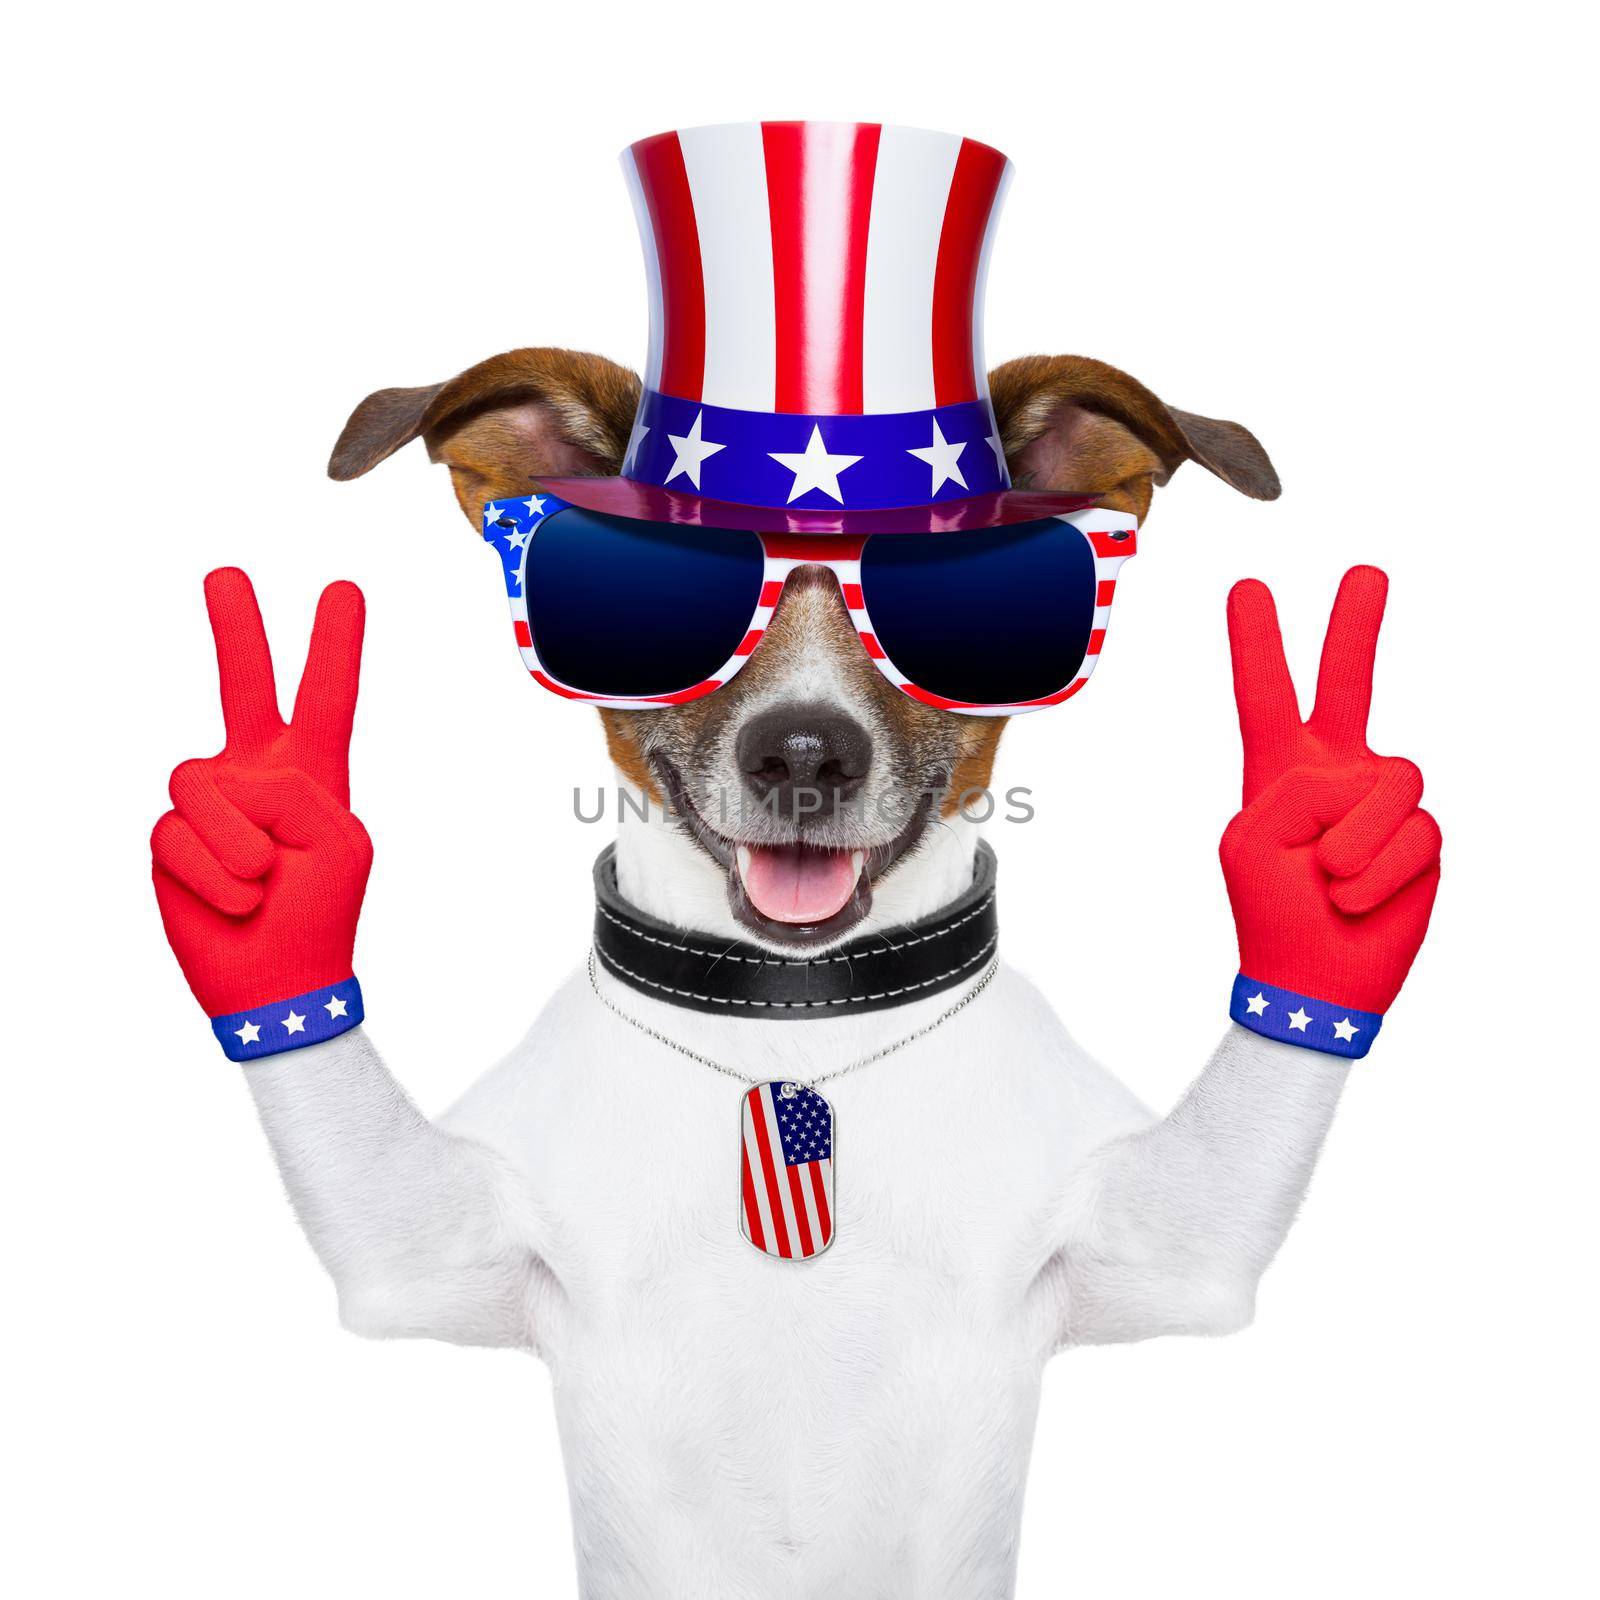 american peace and victory fingers dog with red gloves and glasses